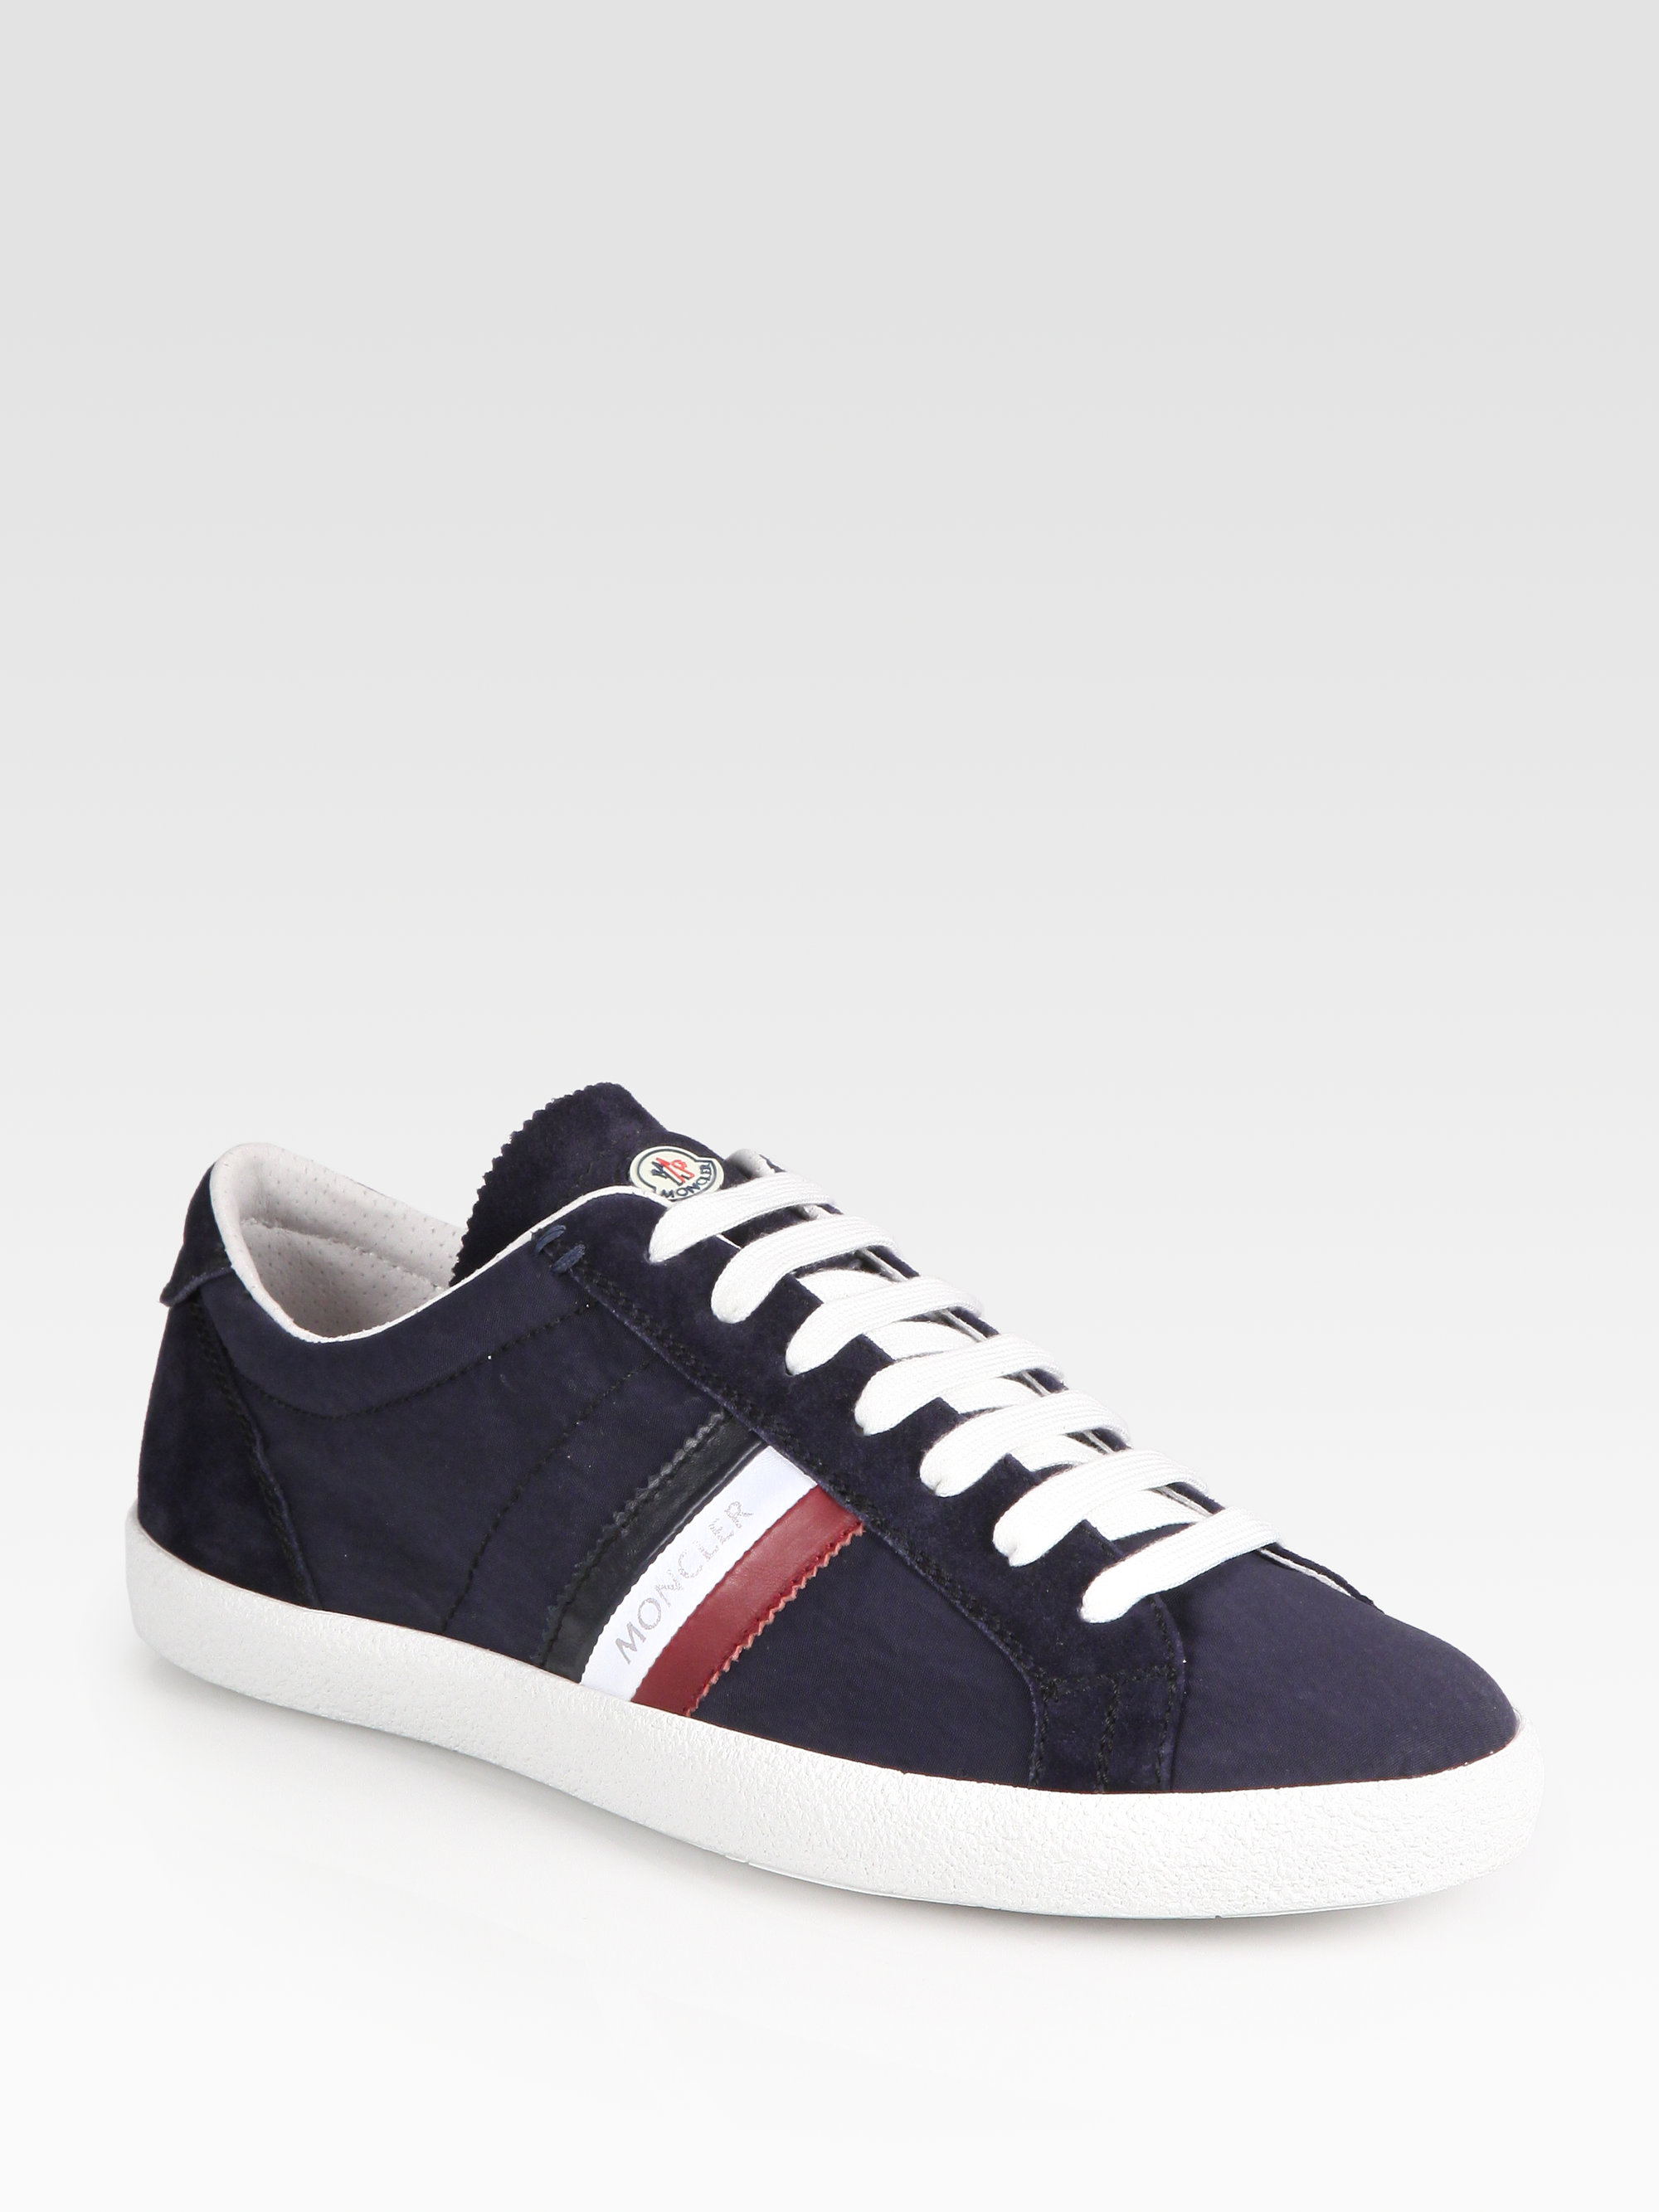 Moncler Monaco Suede and Canvas Sneakers in Blue for Men - Lyst